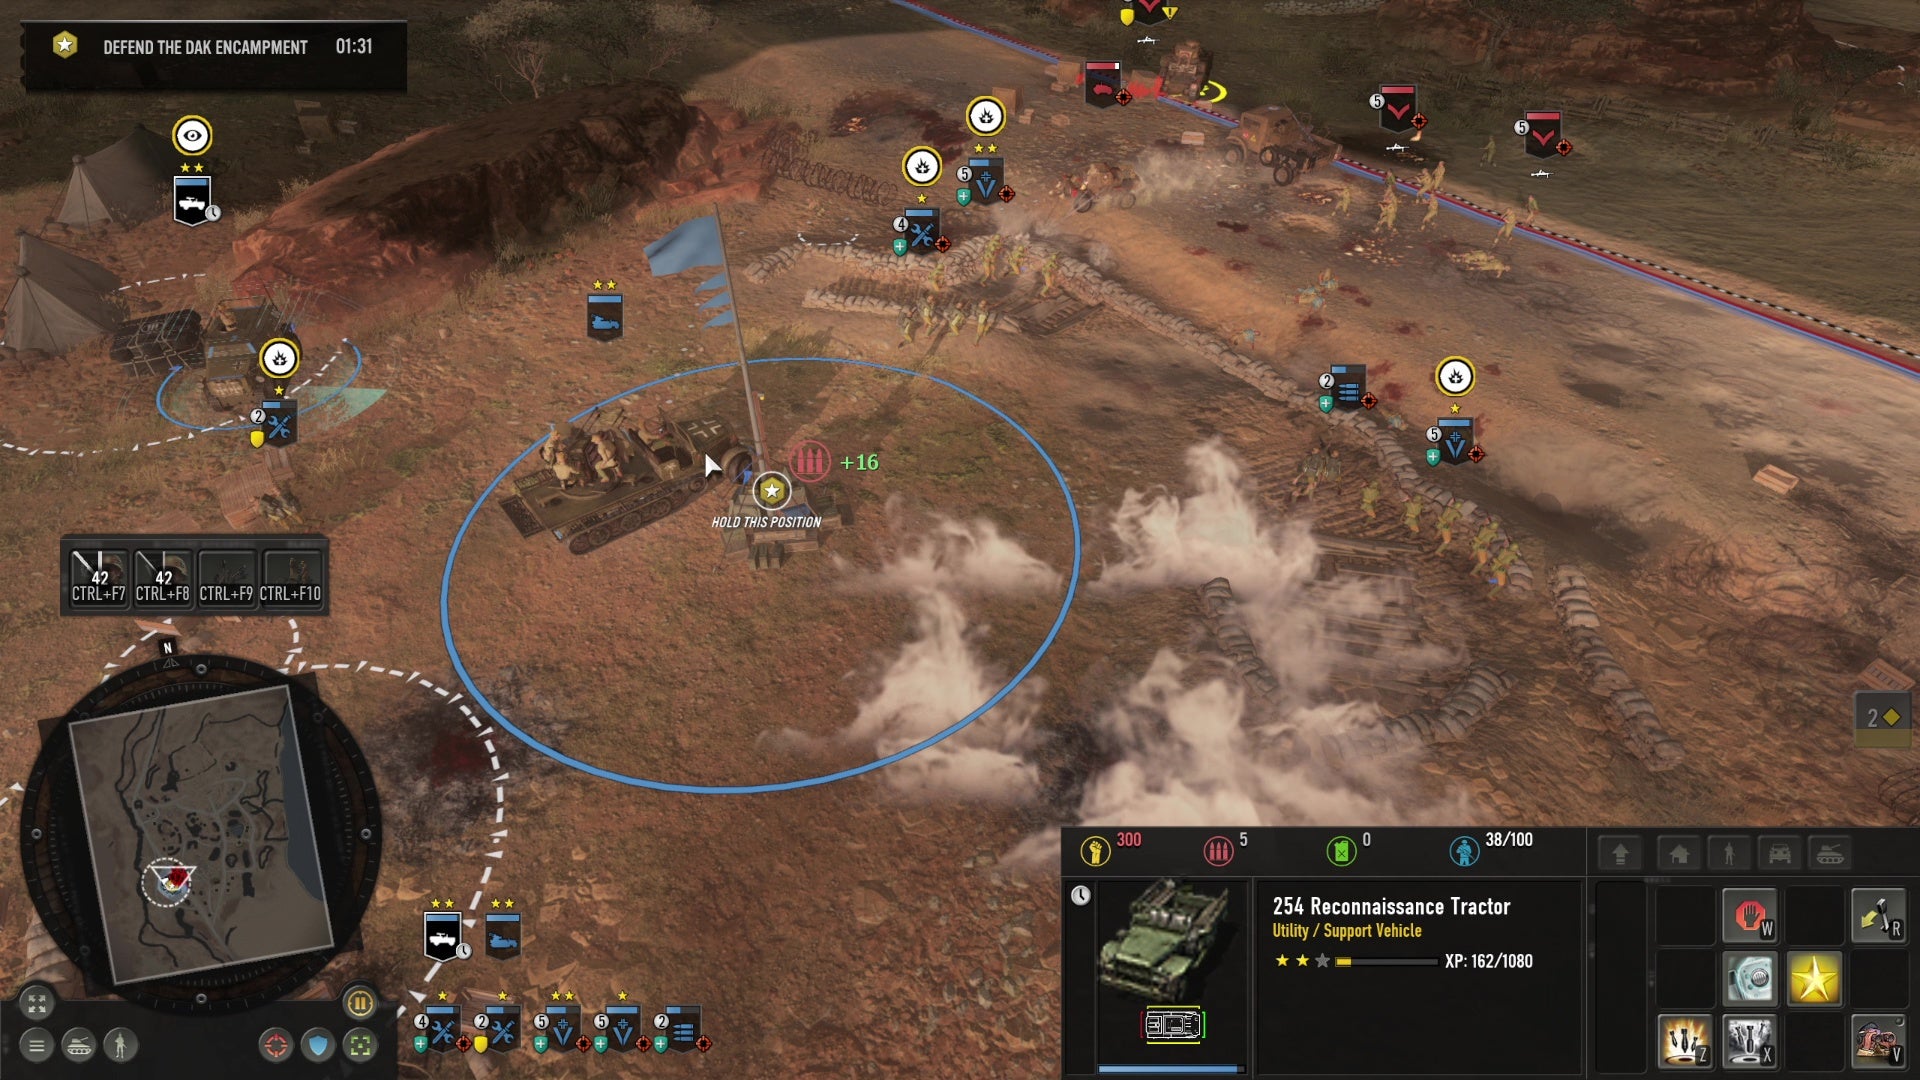 German forces attack British soldiers in a desert in Company Of Heroes 3